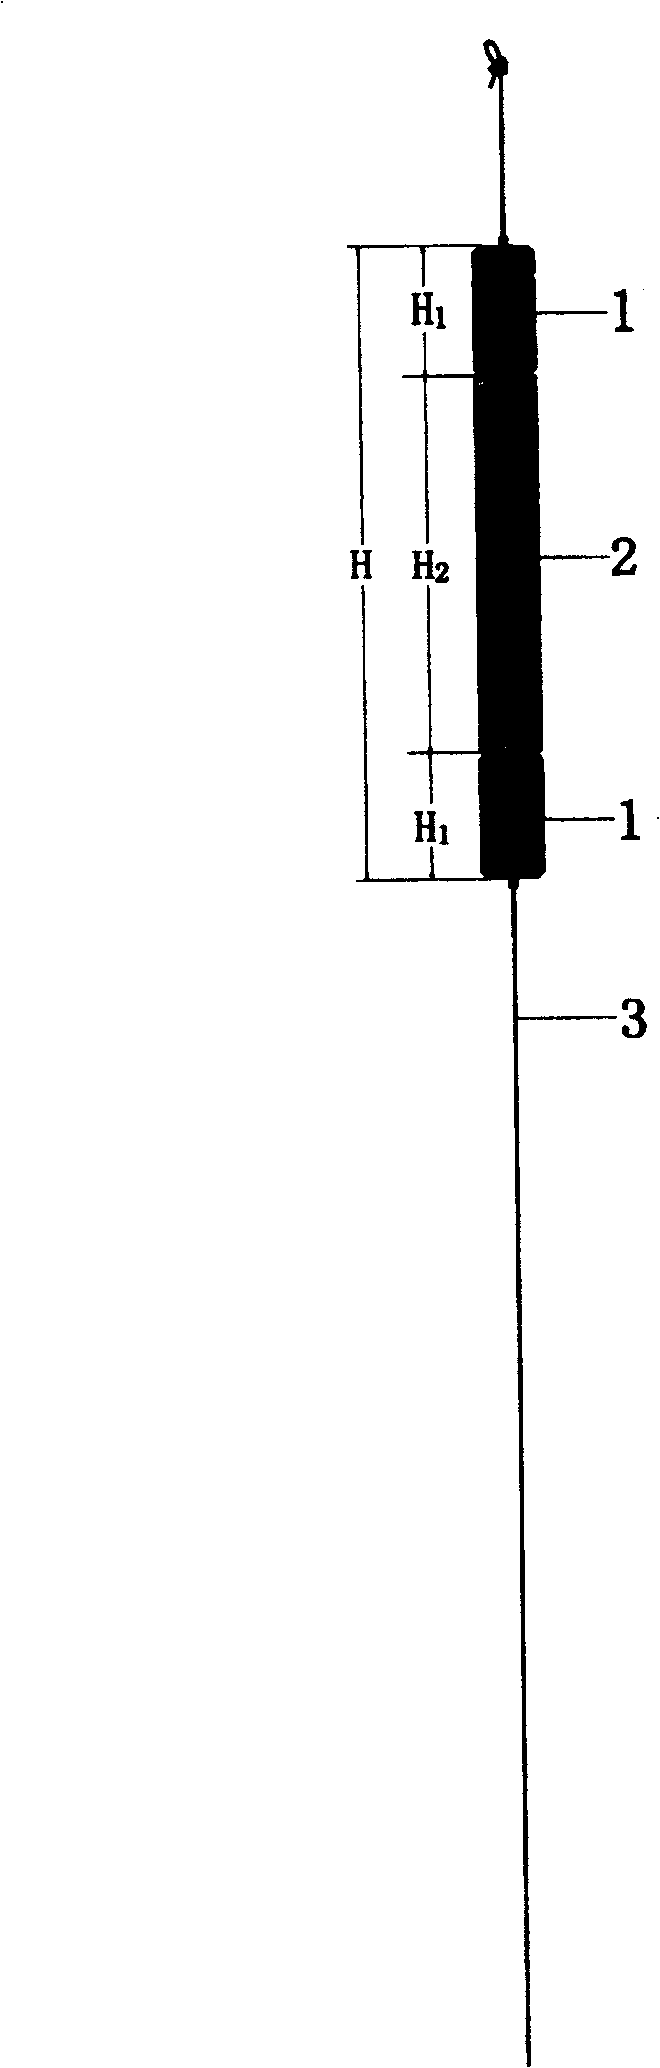 Intrauterine device containing progesterone with no bracket